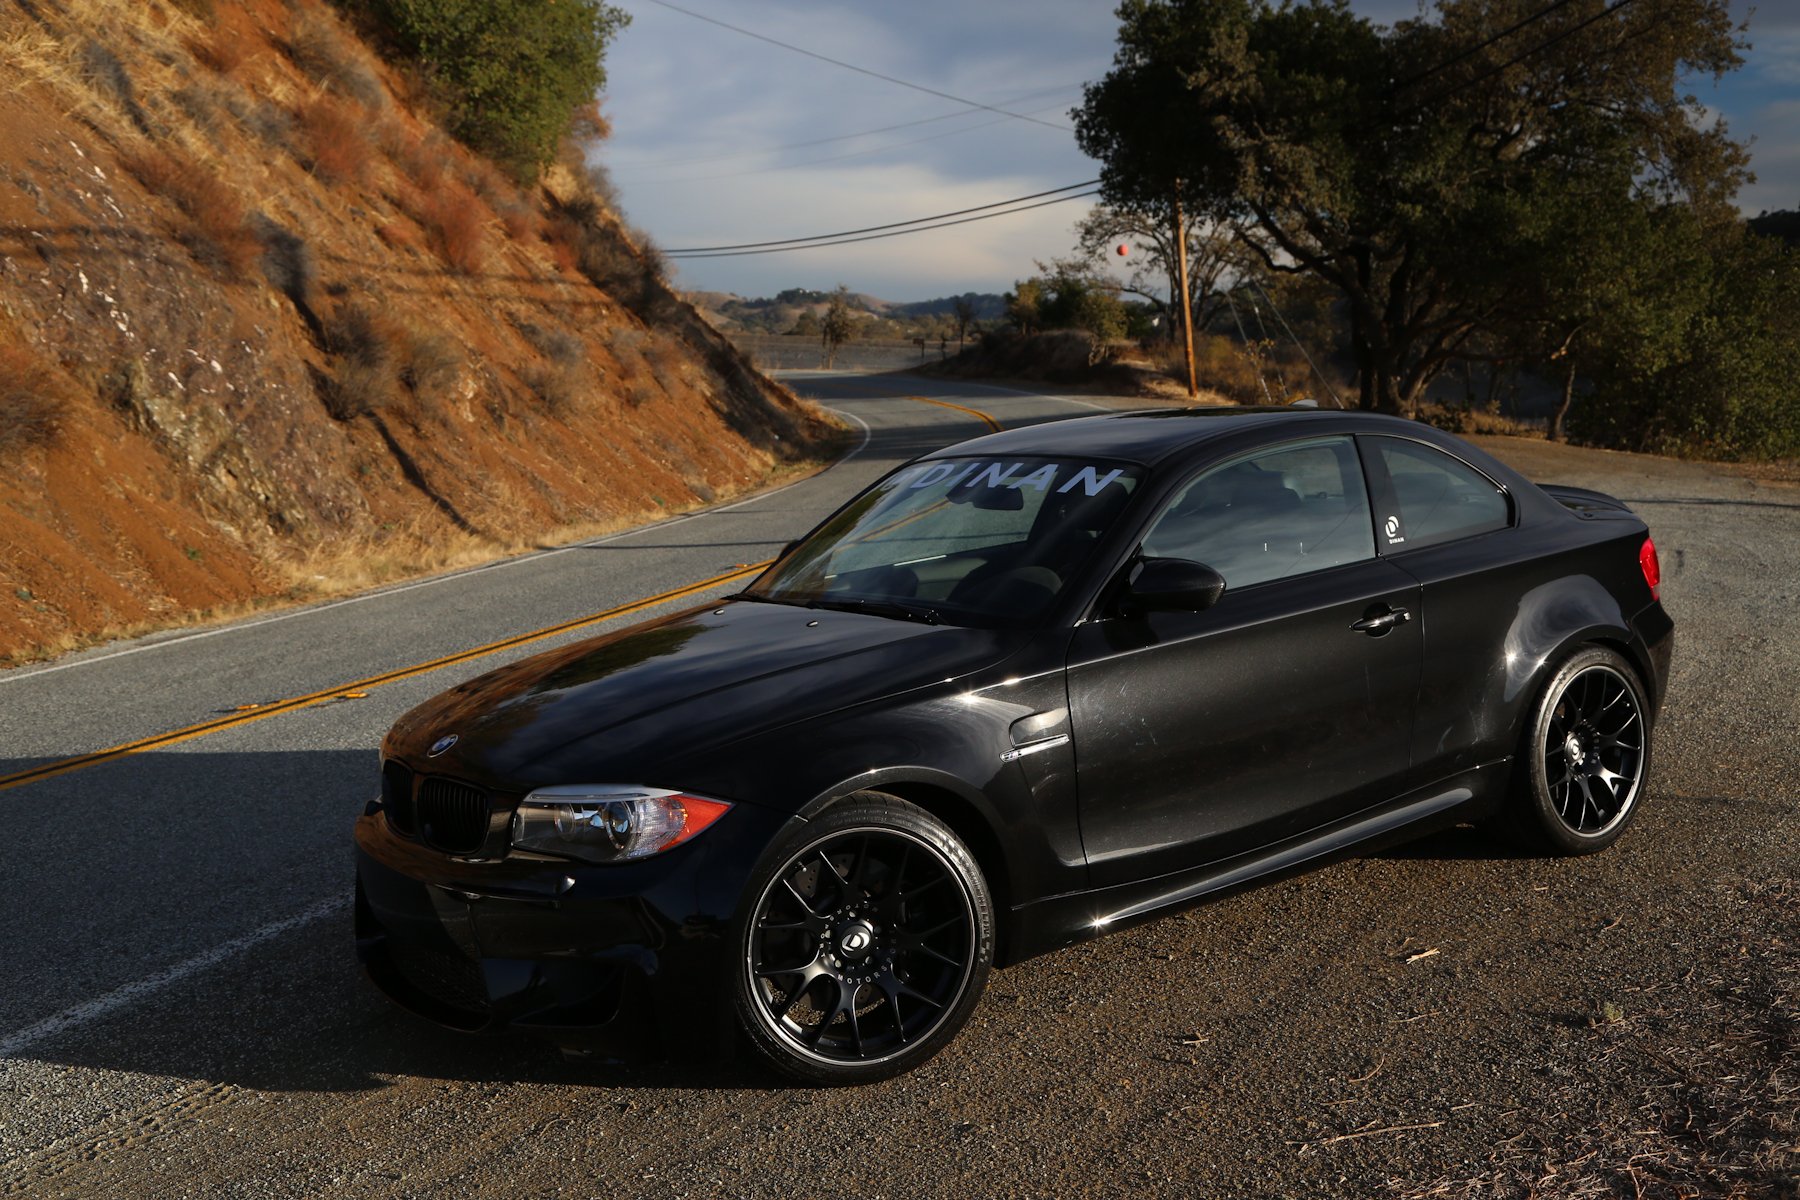 Dinan S3 R Bmw 1 Series M Coupe E Cars Black Modified 14 Wallpapers Hd Desktop And Mobile Backgrounds